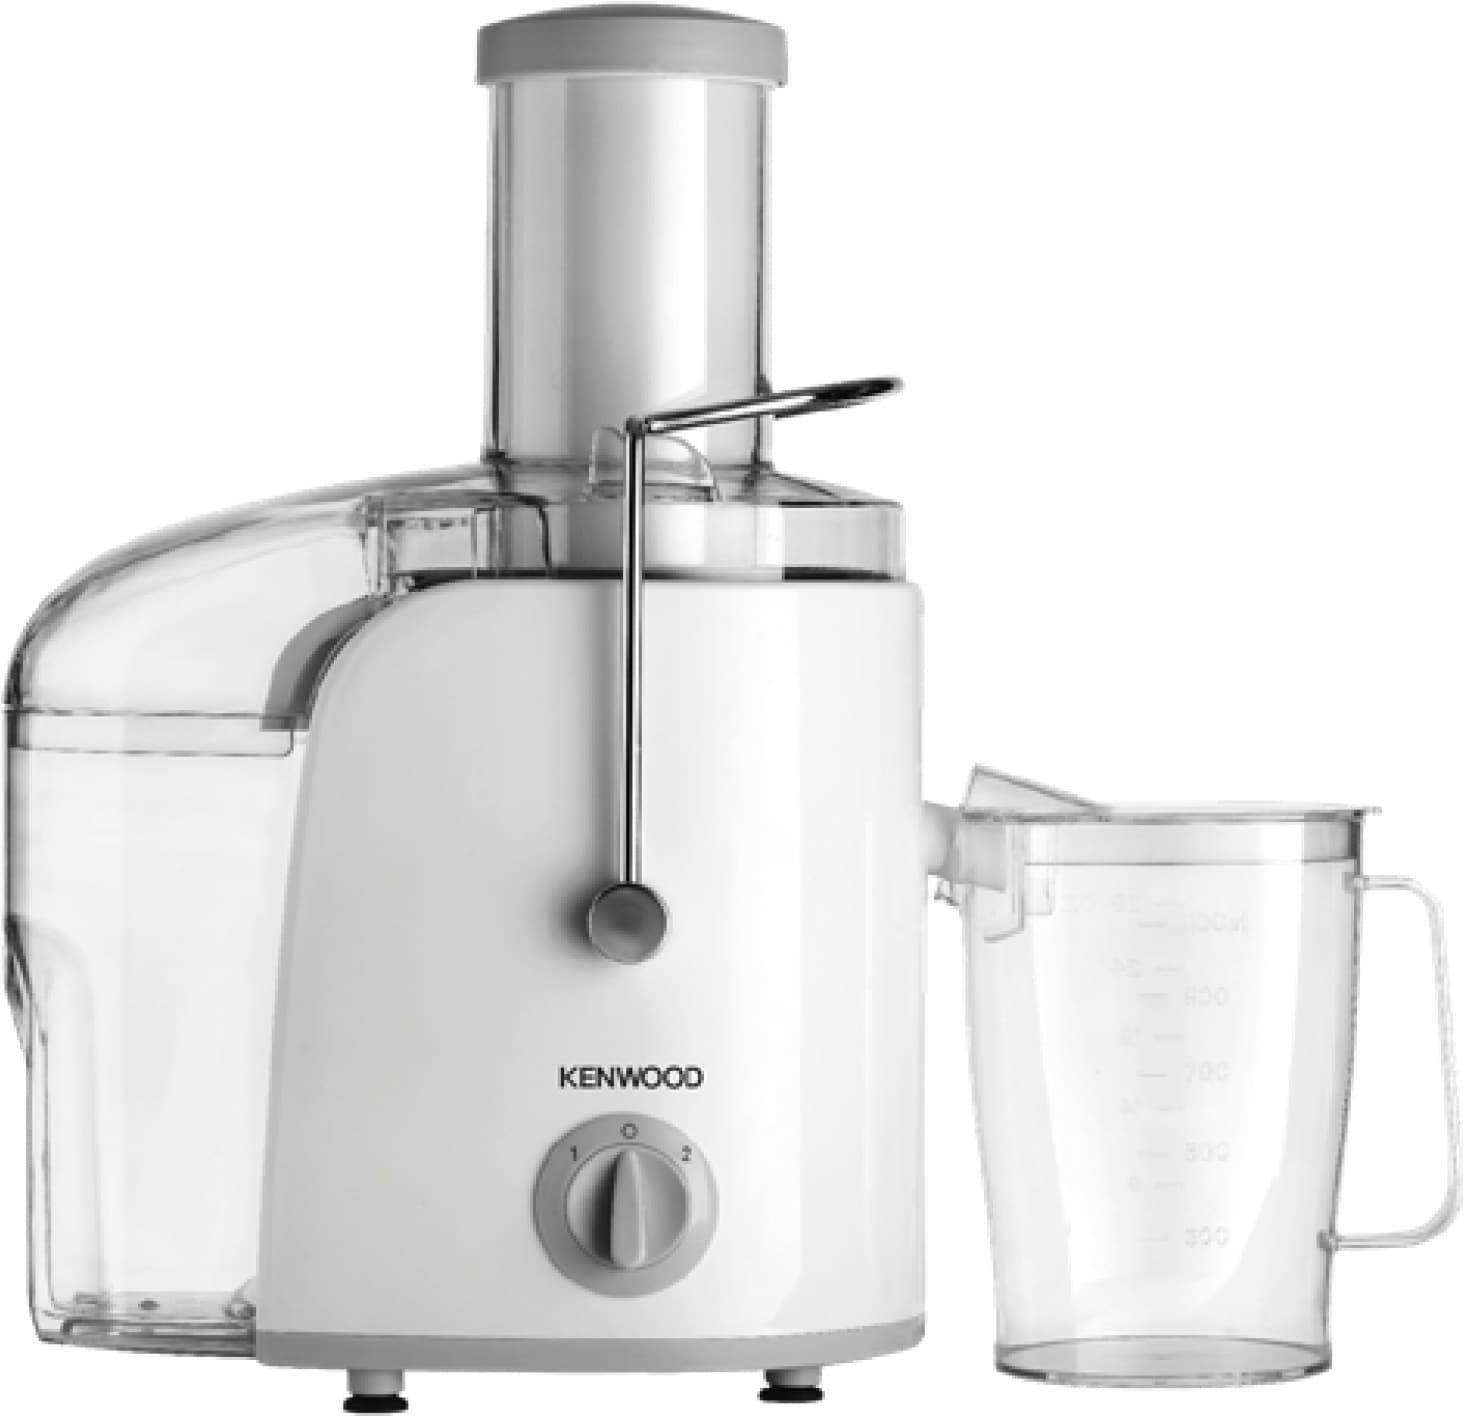 Kenwood electric fruit juice extractor 800W OWJEP02.A0WH